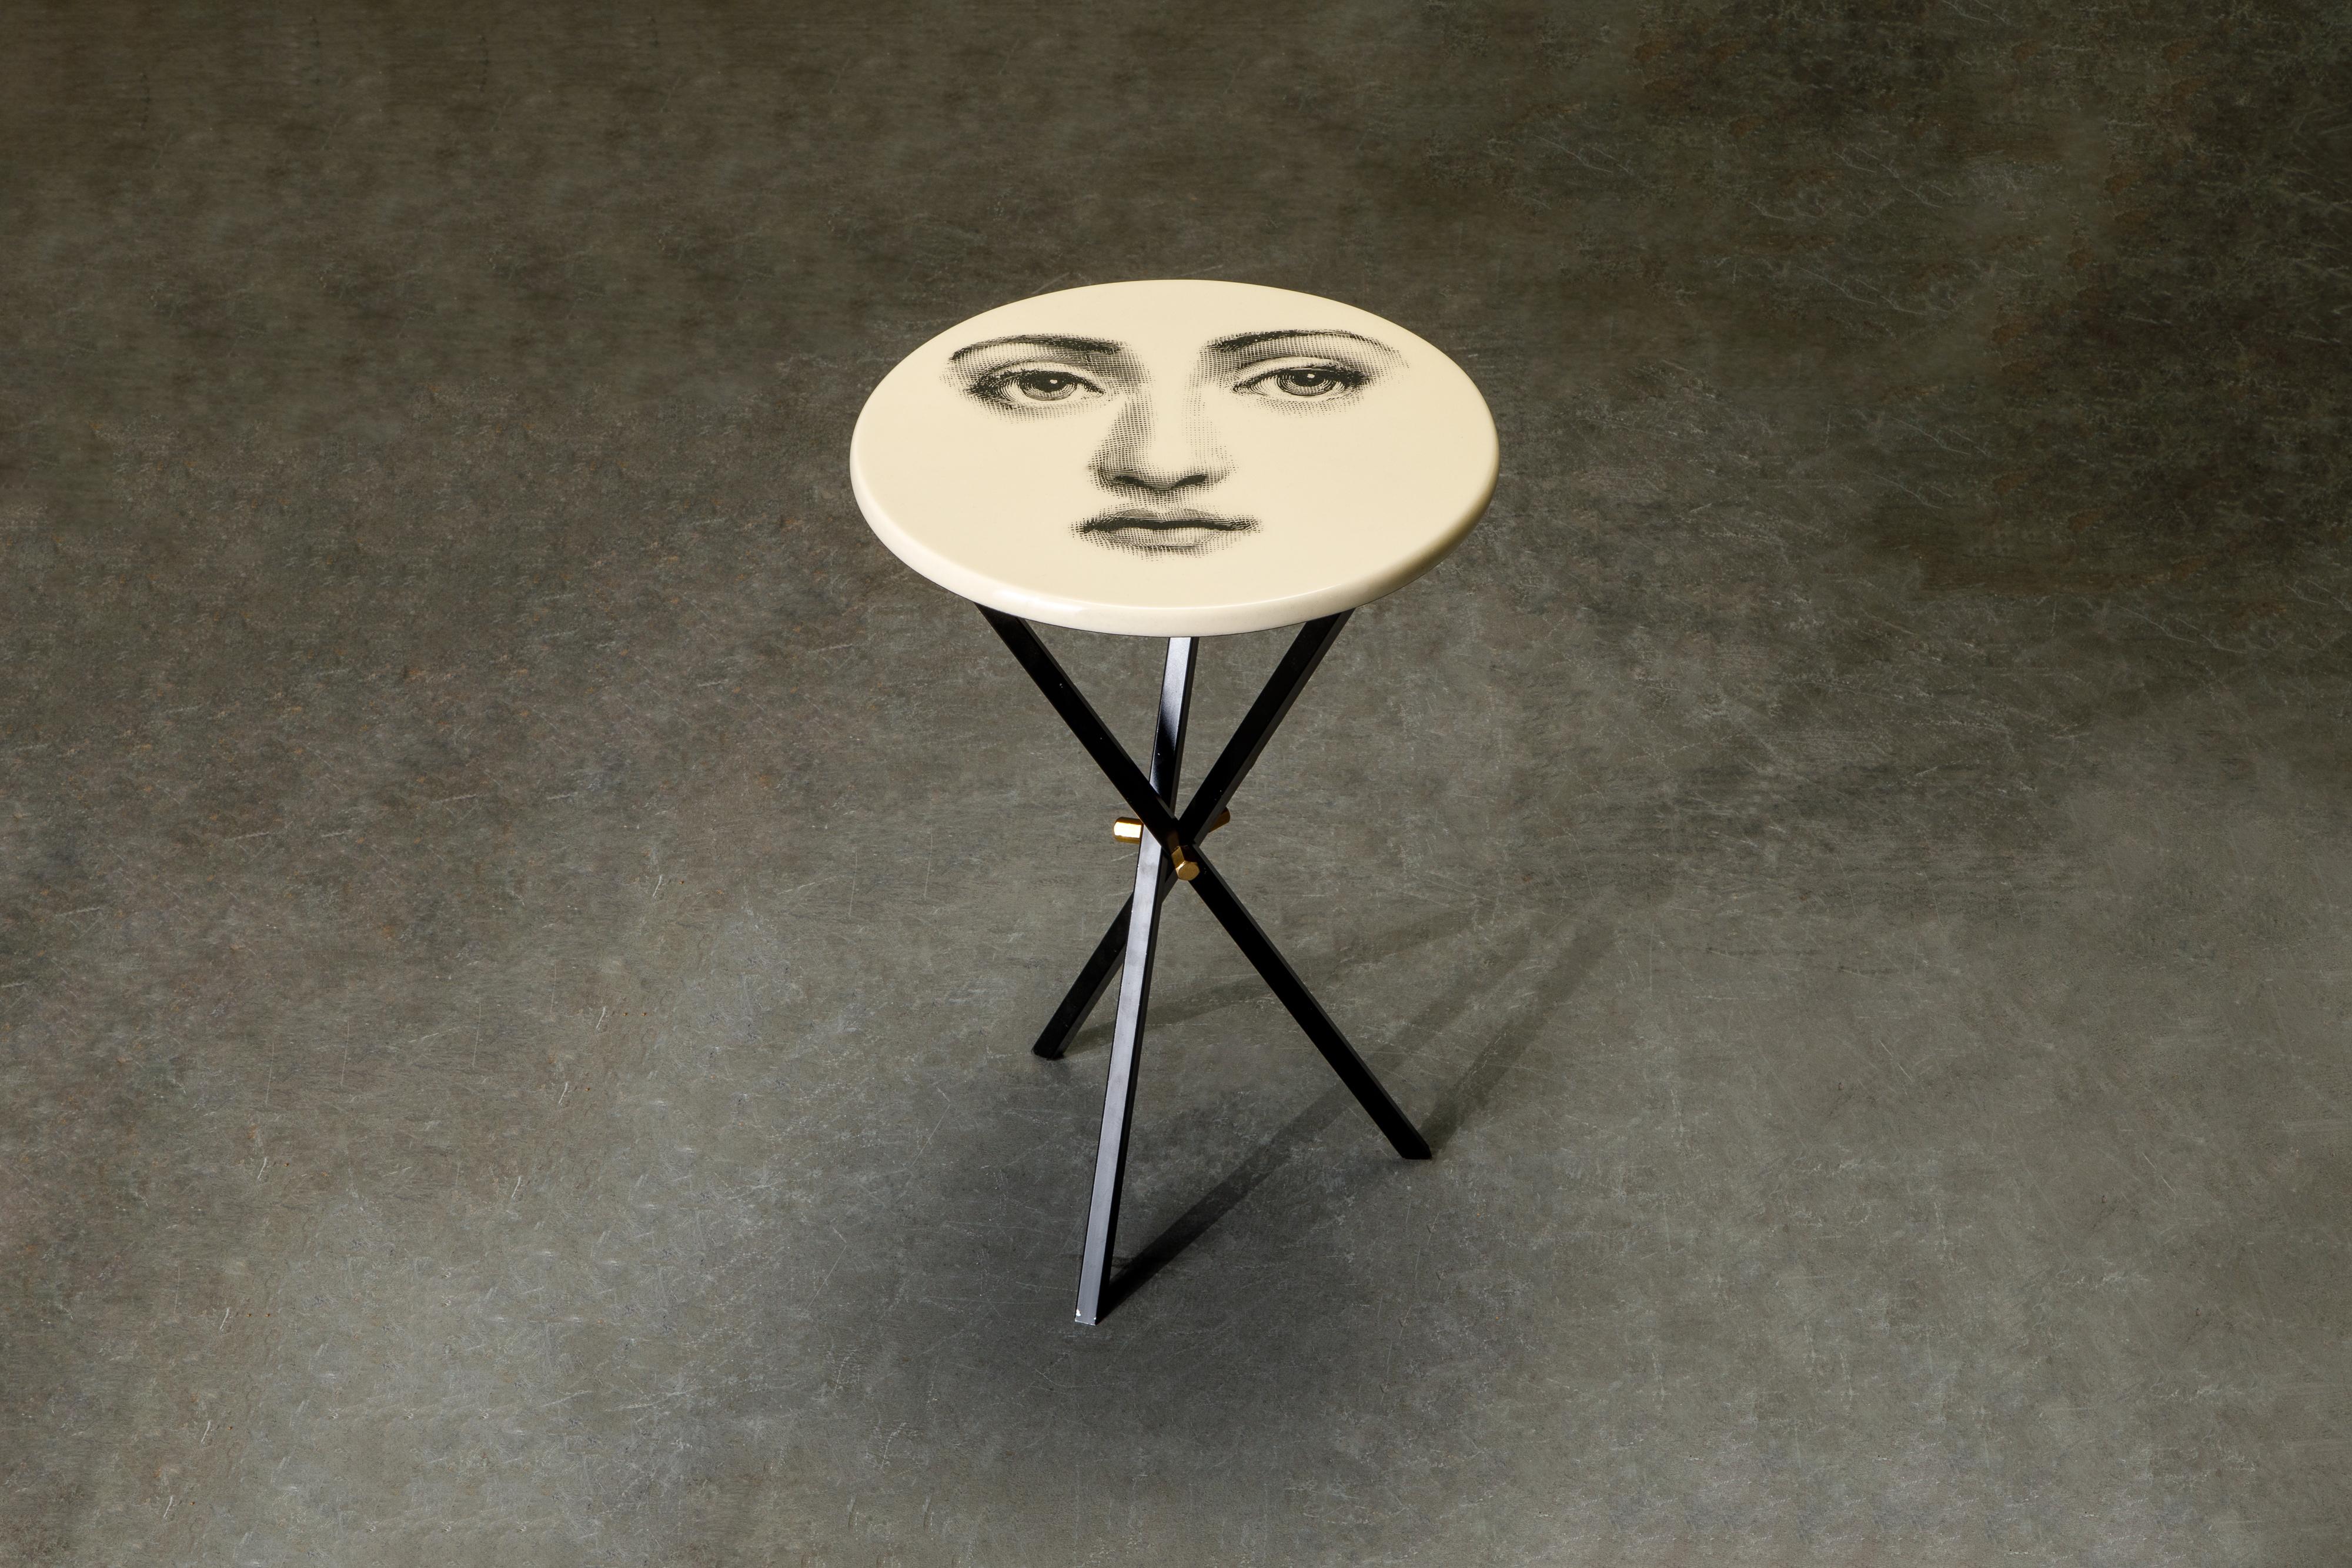 Mid-Century Modern 'Viso Di Donno' Pair of Side Tables by Piero Fornasetti, circa 1960s, Signed